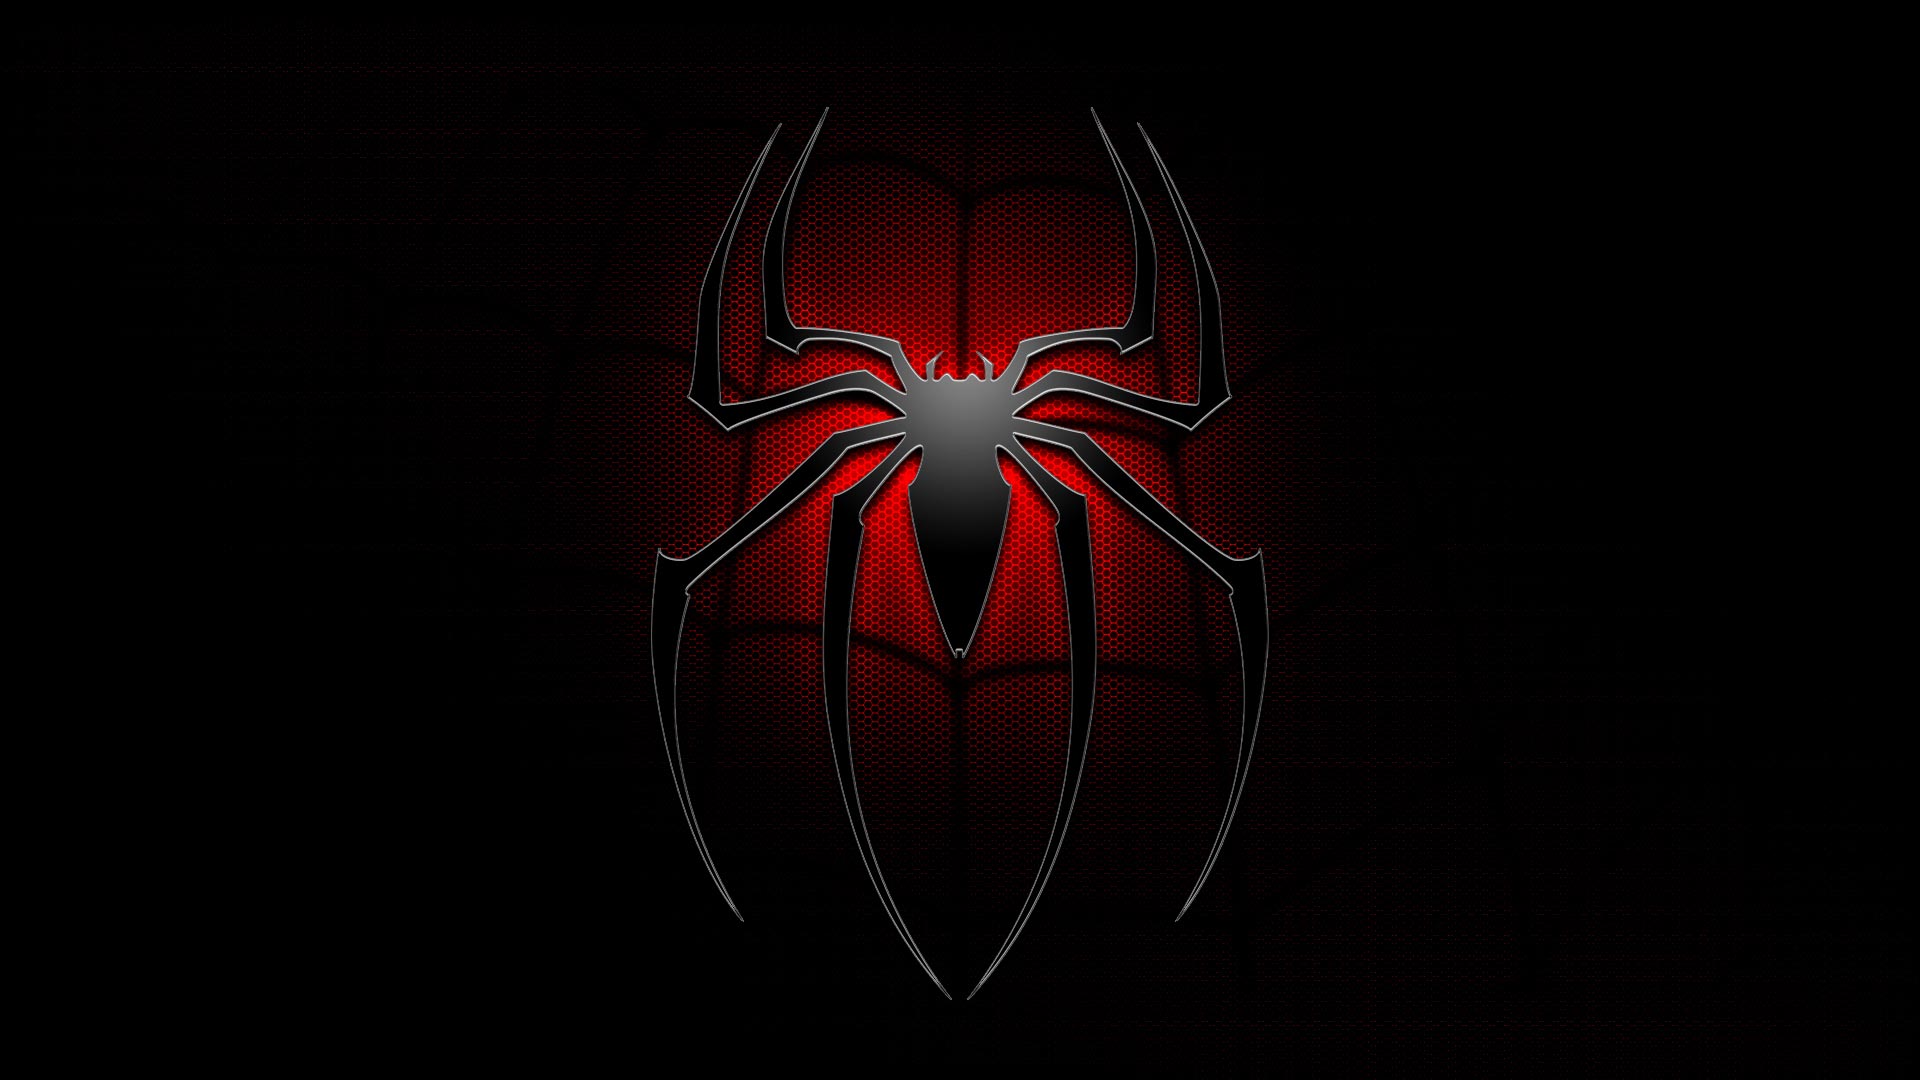 The Amazing Spider man 2 Wallpaper 8 to Choose From - Movie